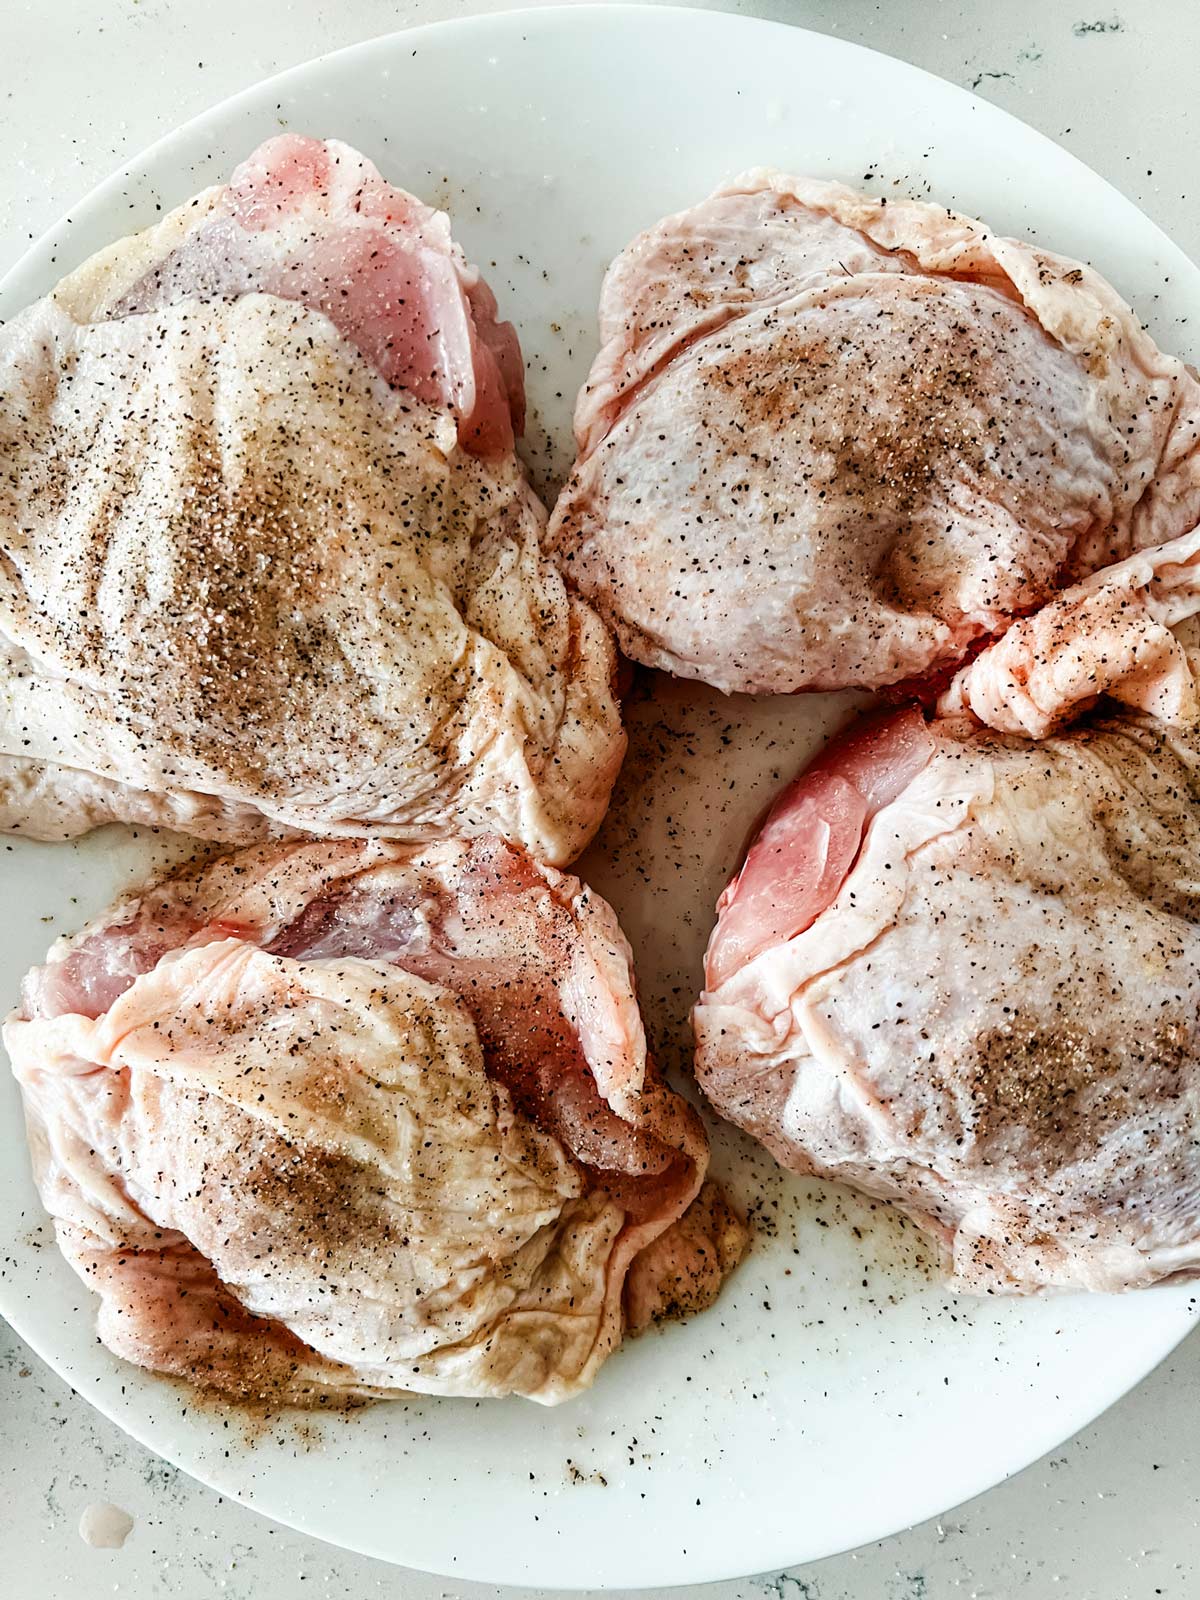 Bone-in chicken thighs seasoned with salt and pepper on a white plate.